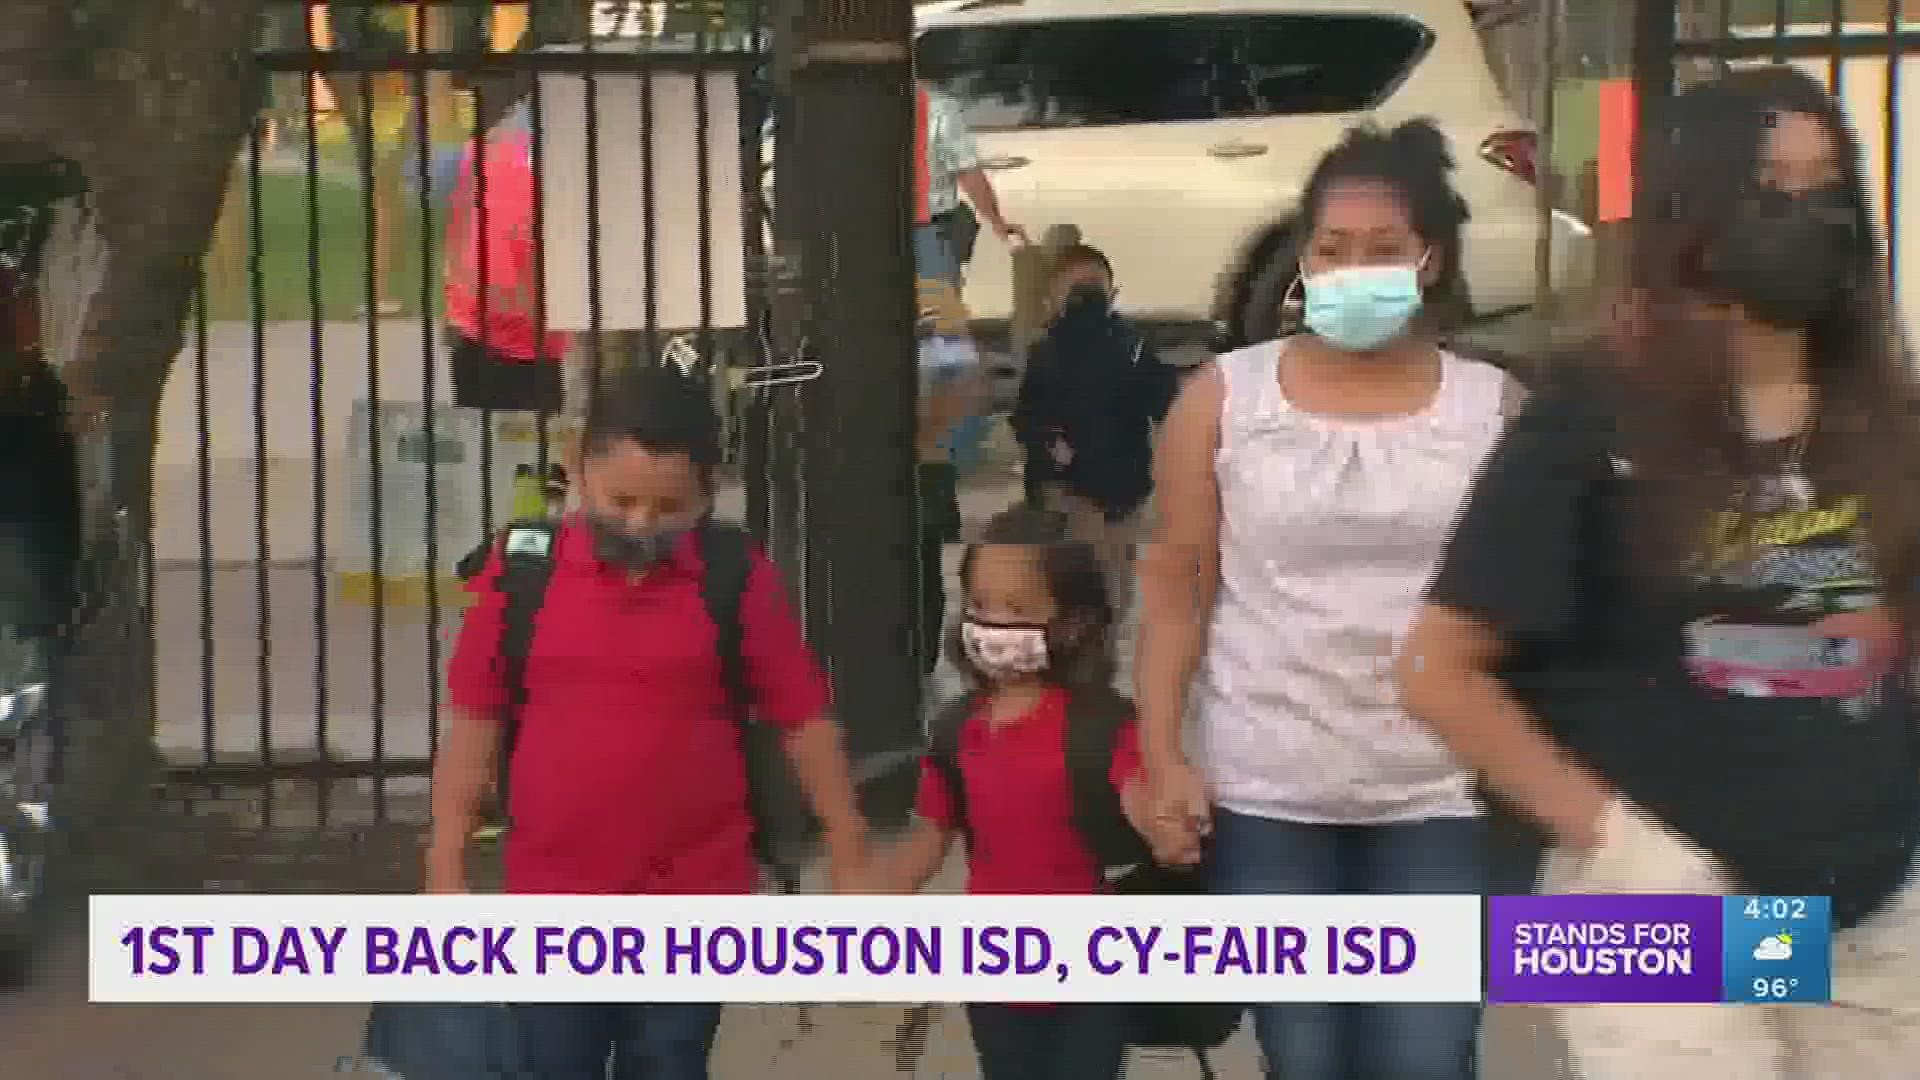 The last big group of Houston-area school districts went back to school today, including HISD and Cy-Fair ISD. Here's what the districts are doing about COVID.